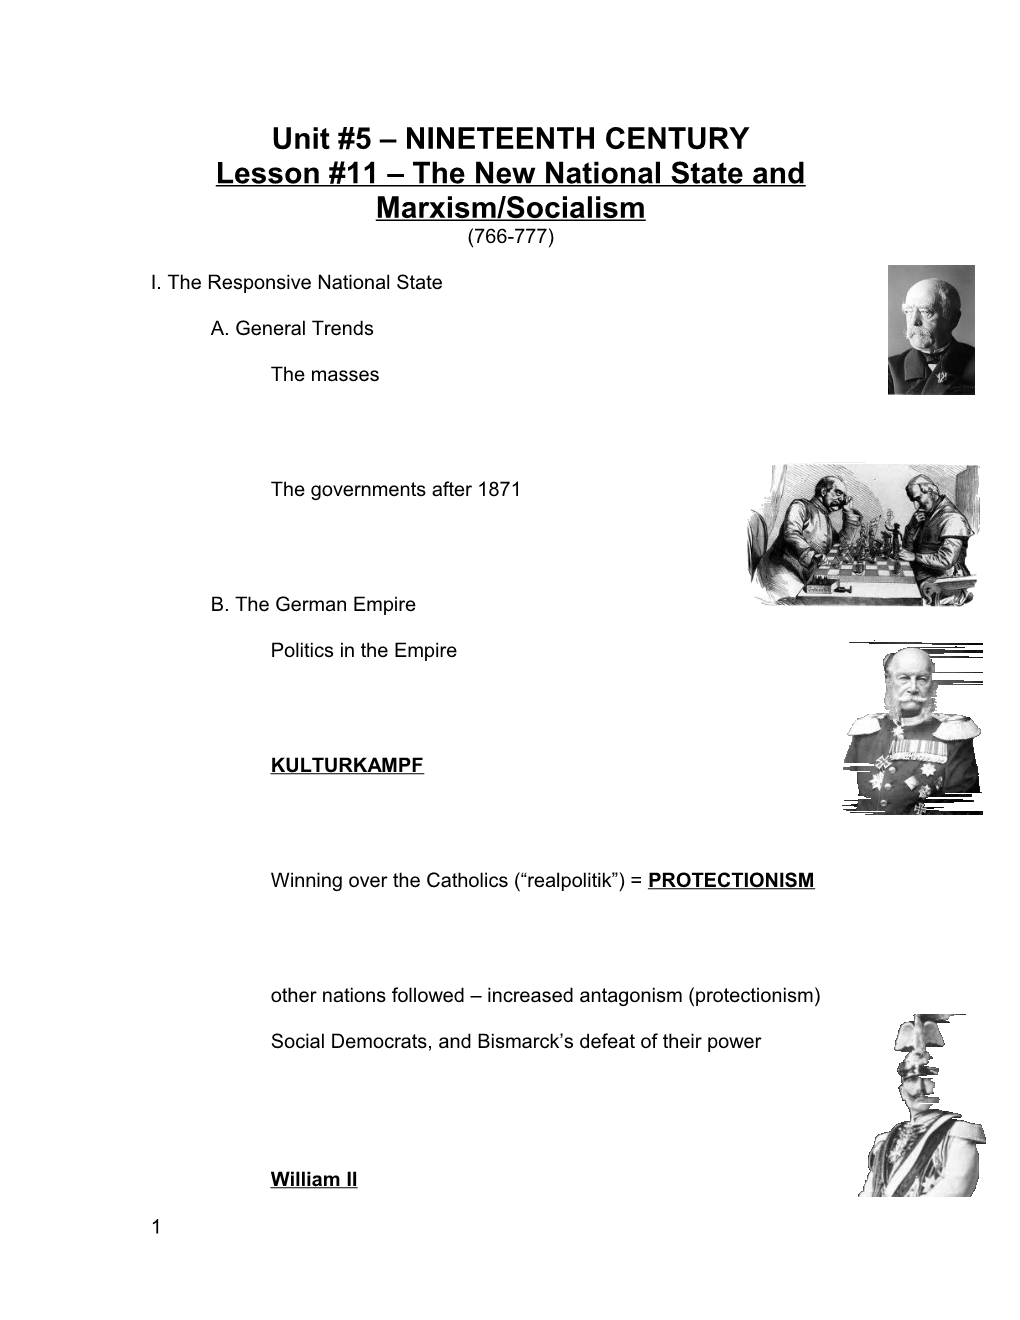 Lesson #11 the New National State and Marxism/Socialism